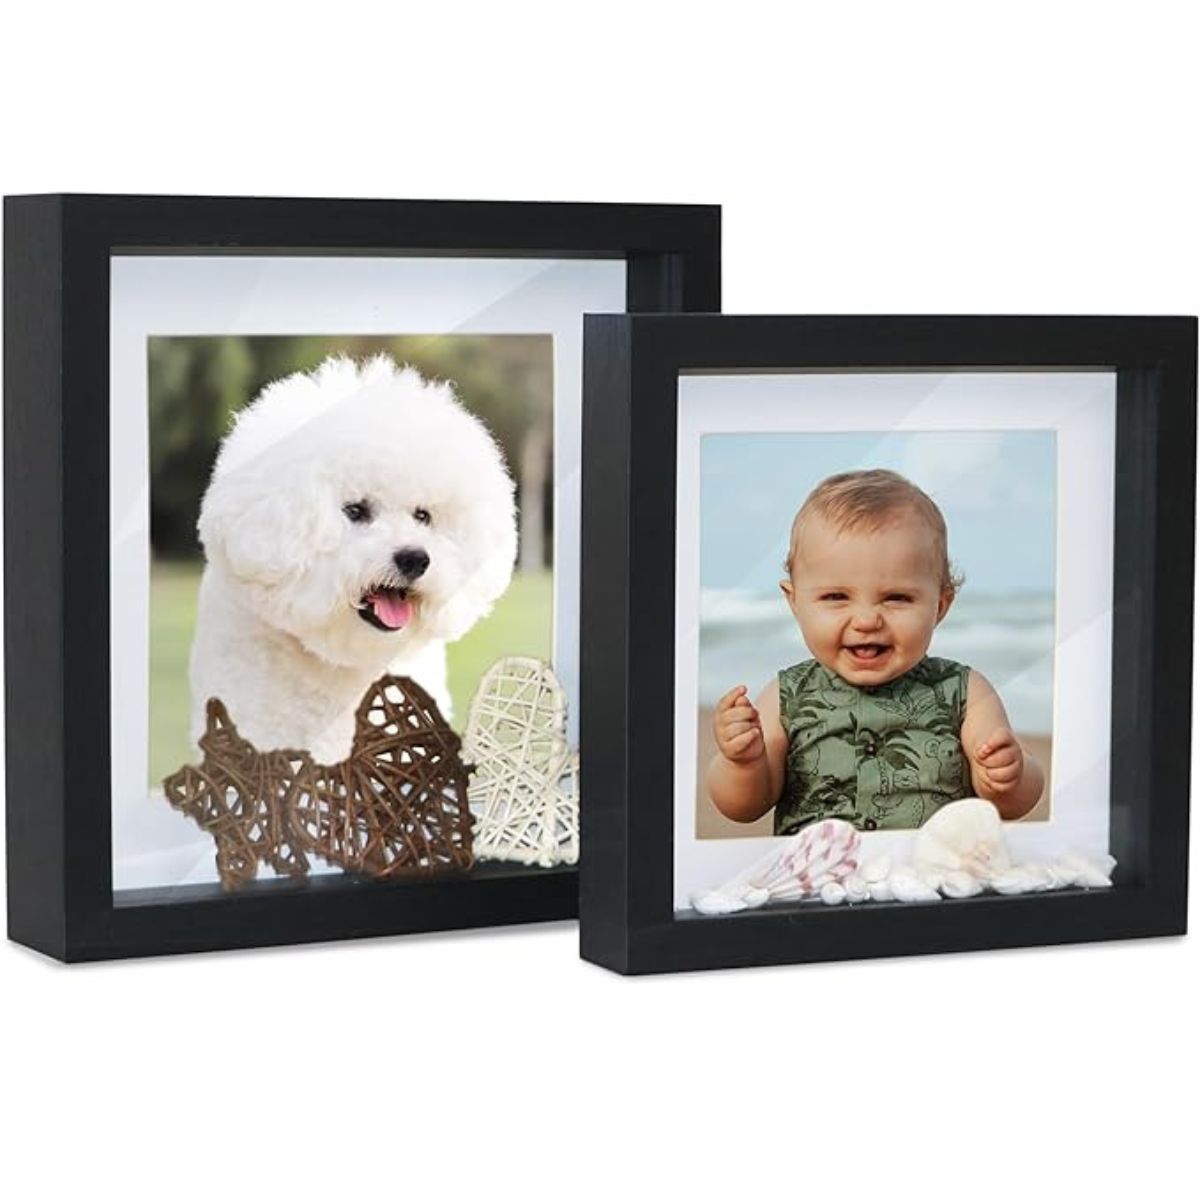 High-quality Box Frame with Mat Set of 2